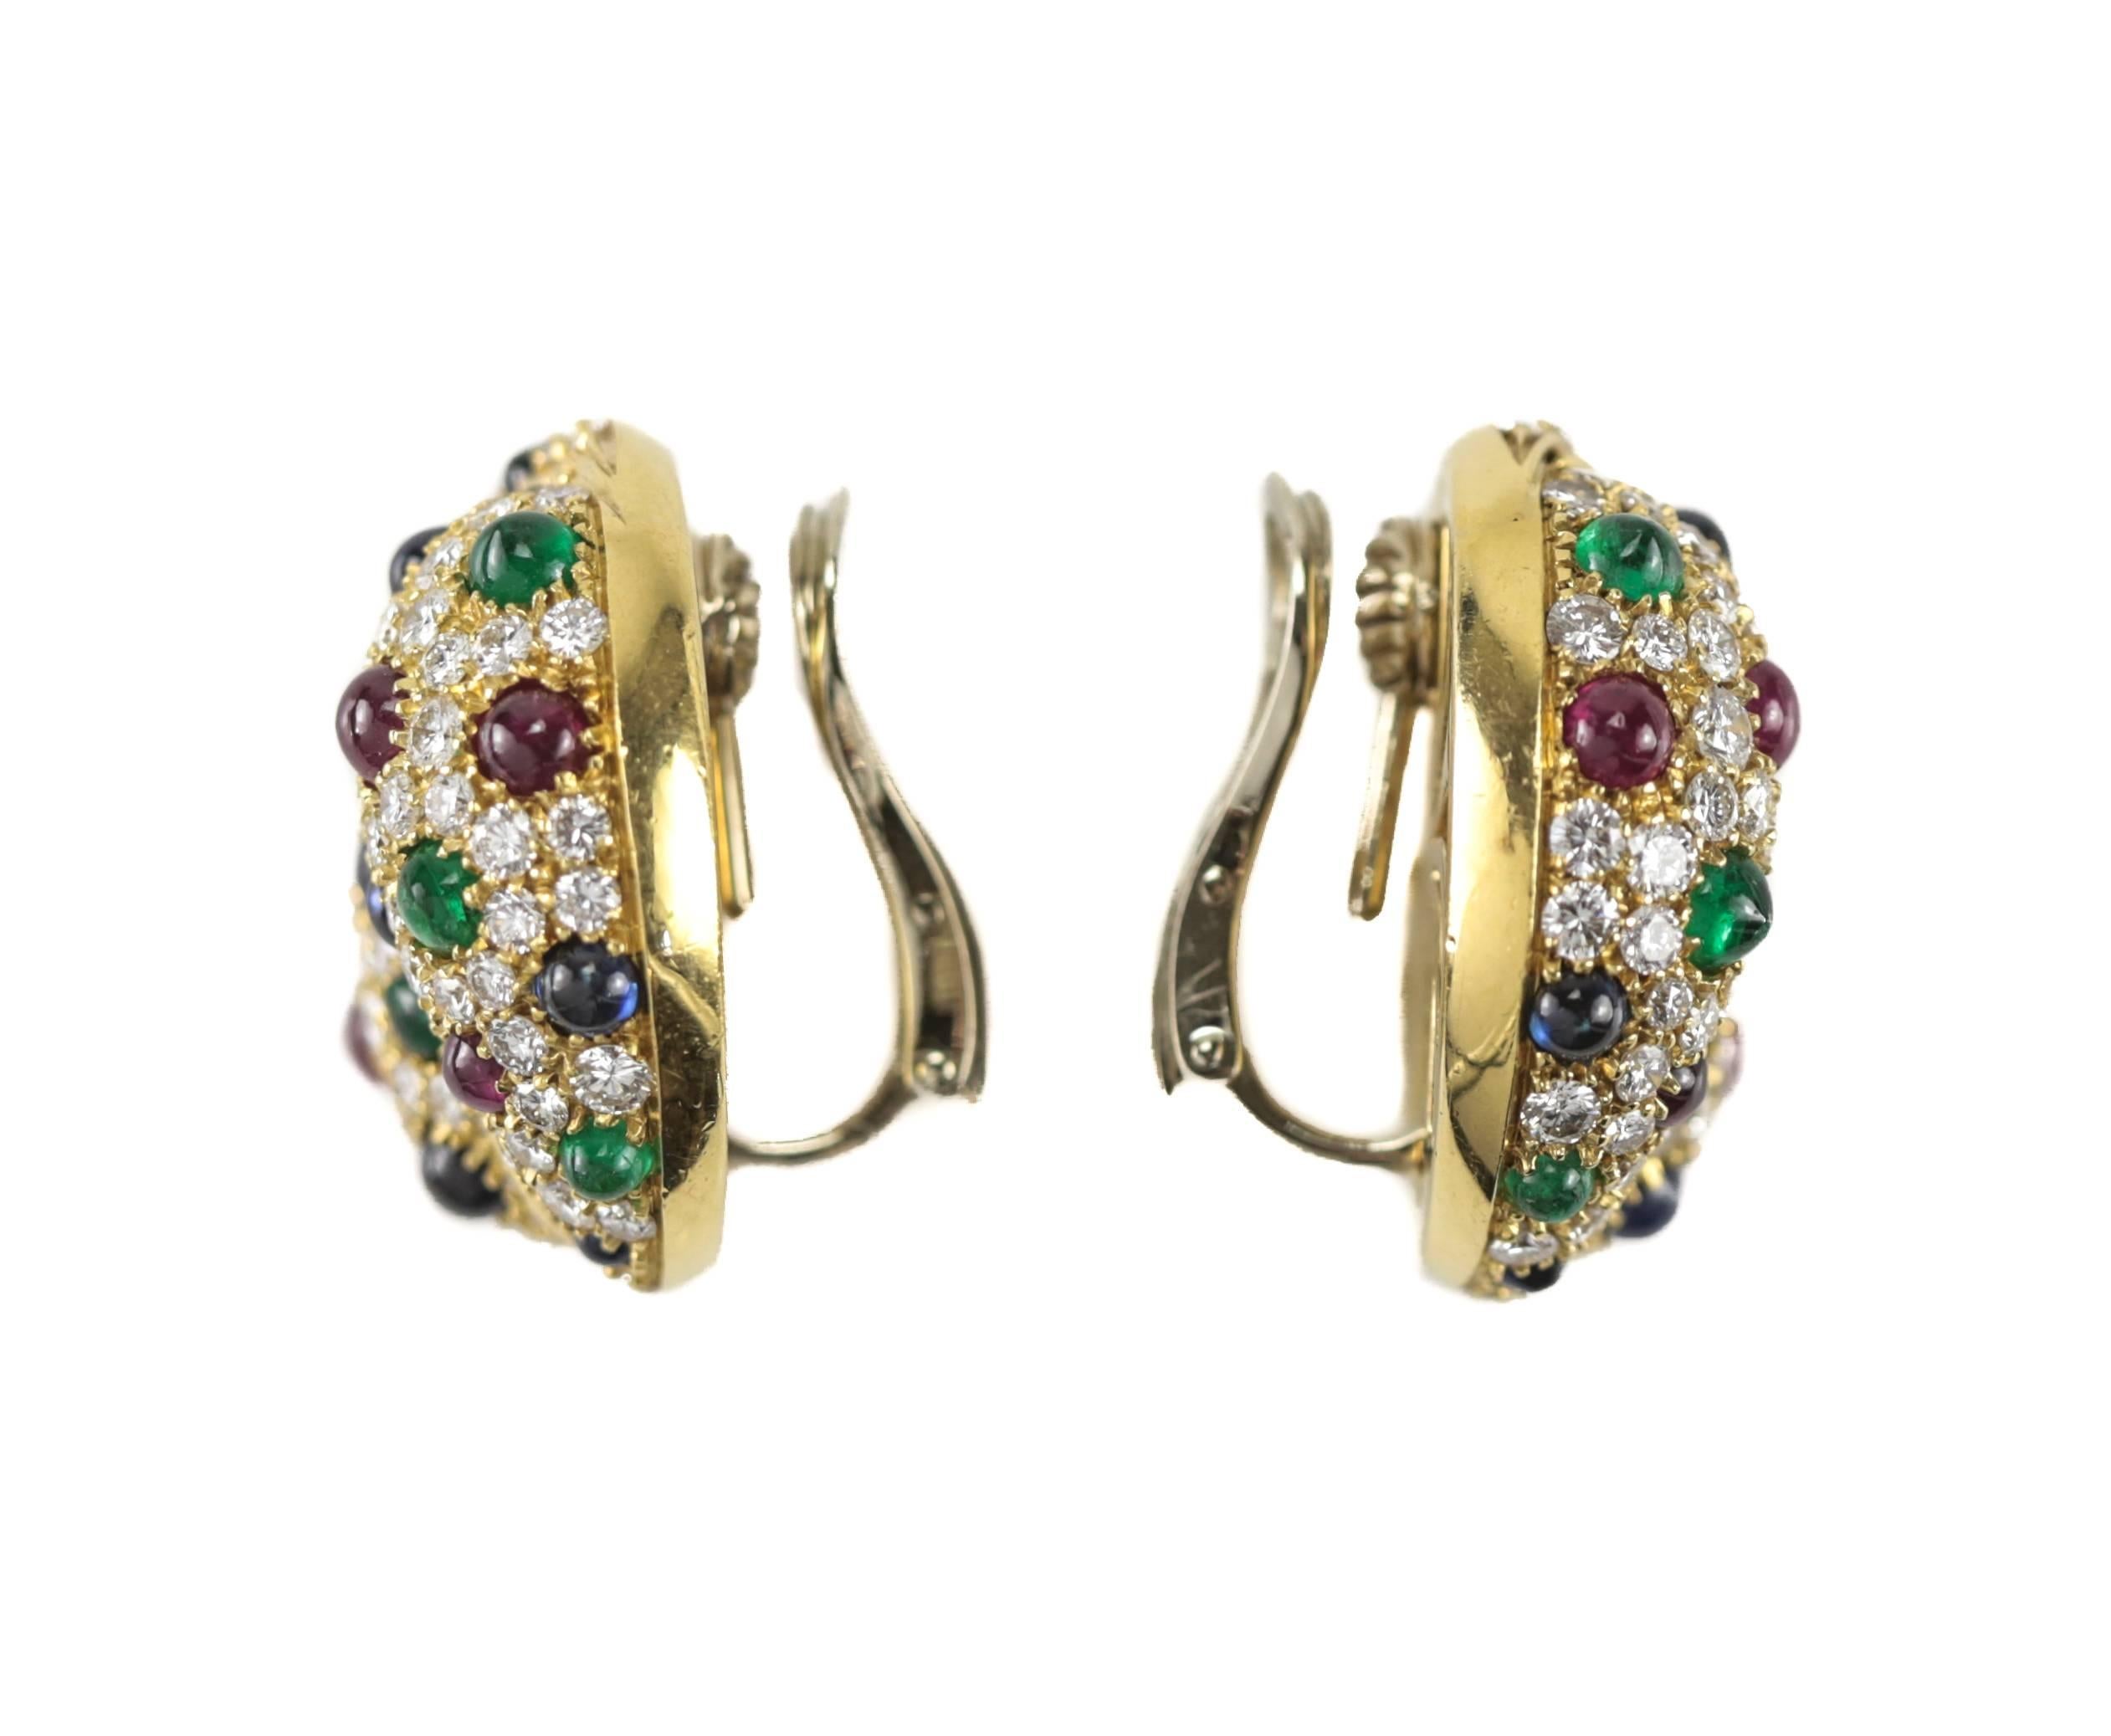 A stunning pair of earrings by Picchiotti, cast in 18-karat yellow gold in a dome design, each with approximately 92 pave set brilliant cut diamonds, six cabochon cut rubies, eight cabochon cut emeralds and eight cabochon cut sapphires. An applied